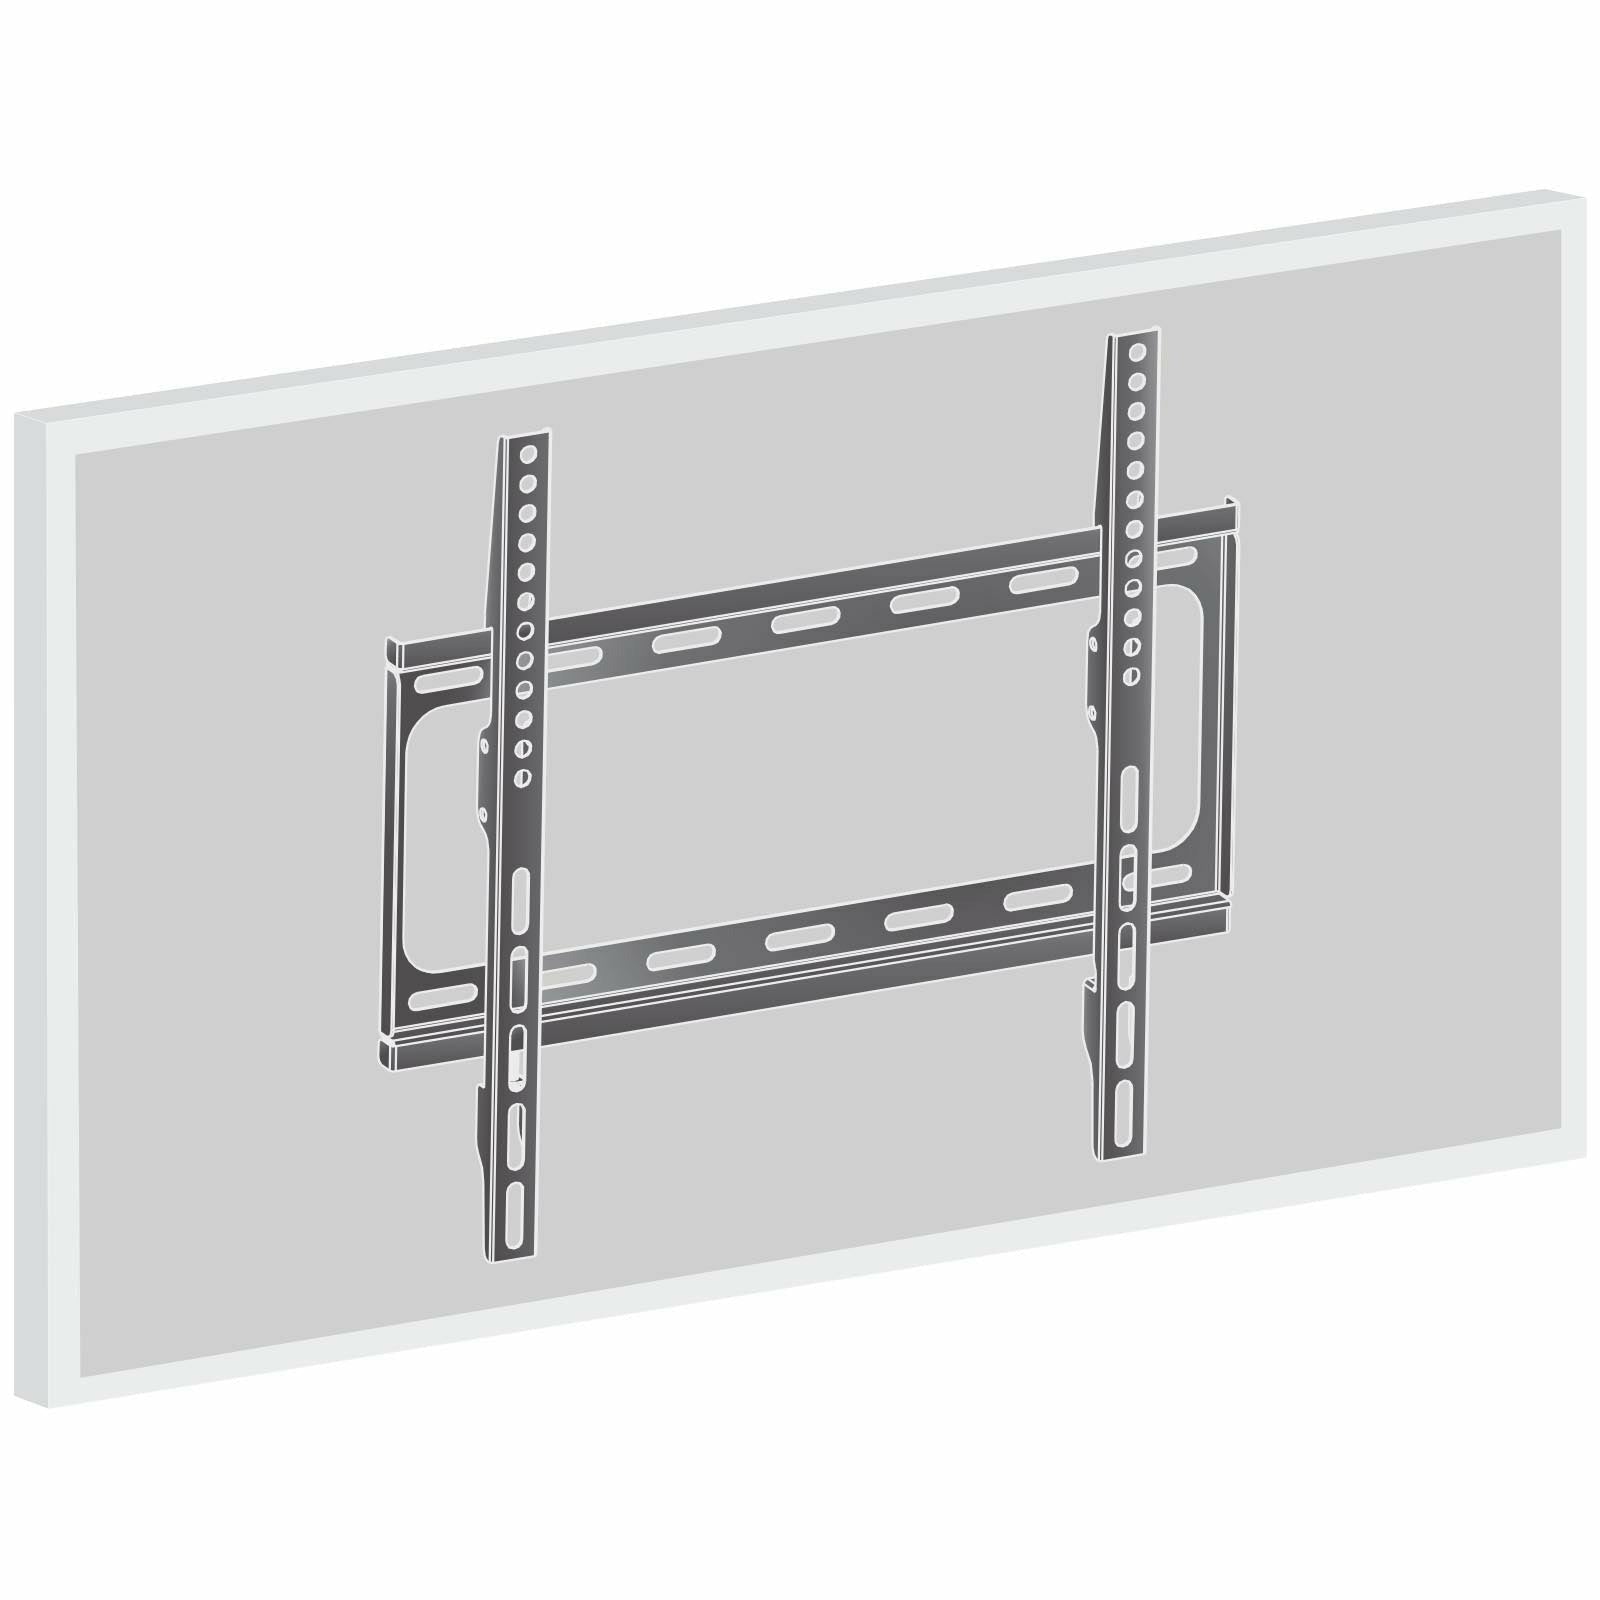 Light Gray iiyama Universal Wall Mount, Max. Load 30 kg, max. 400 x 400 mm for non-touch monitors, packed with bubble level for easy installation